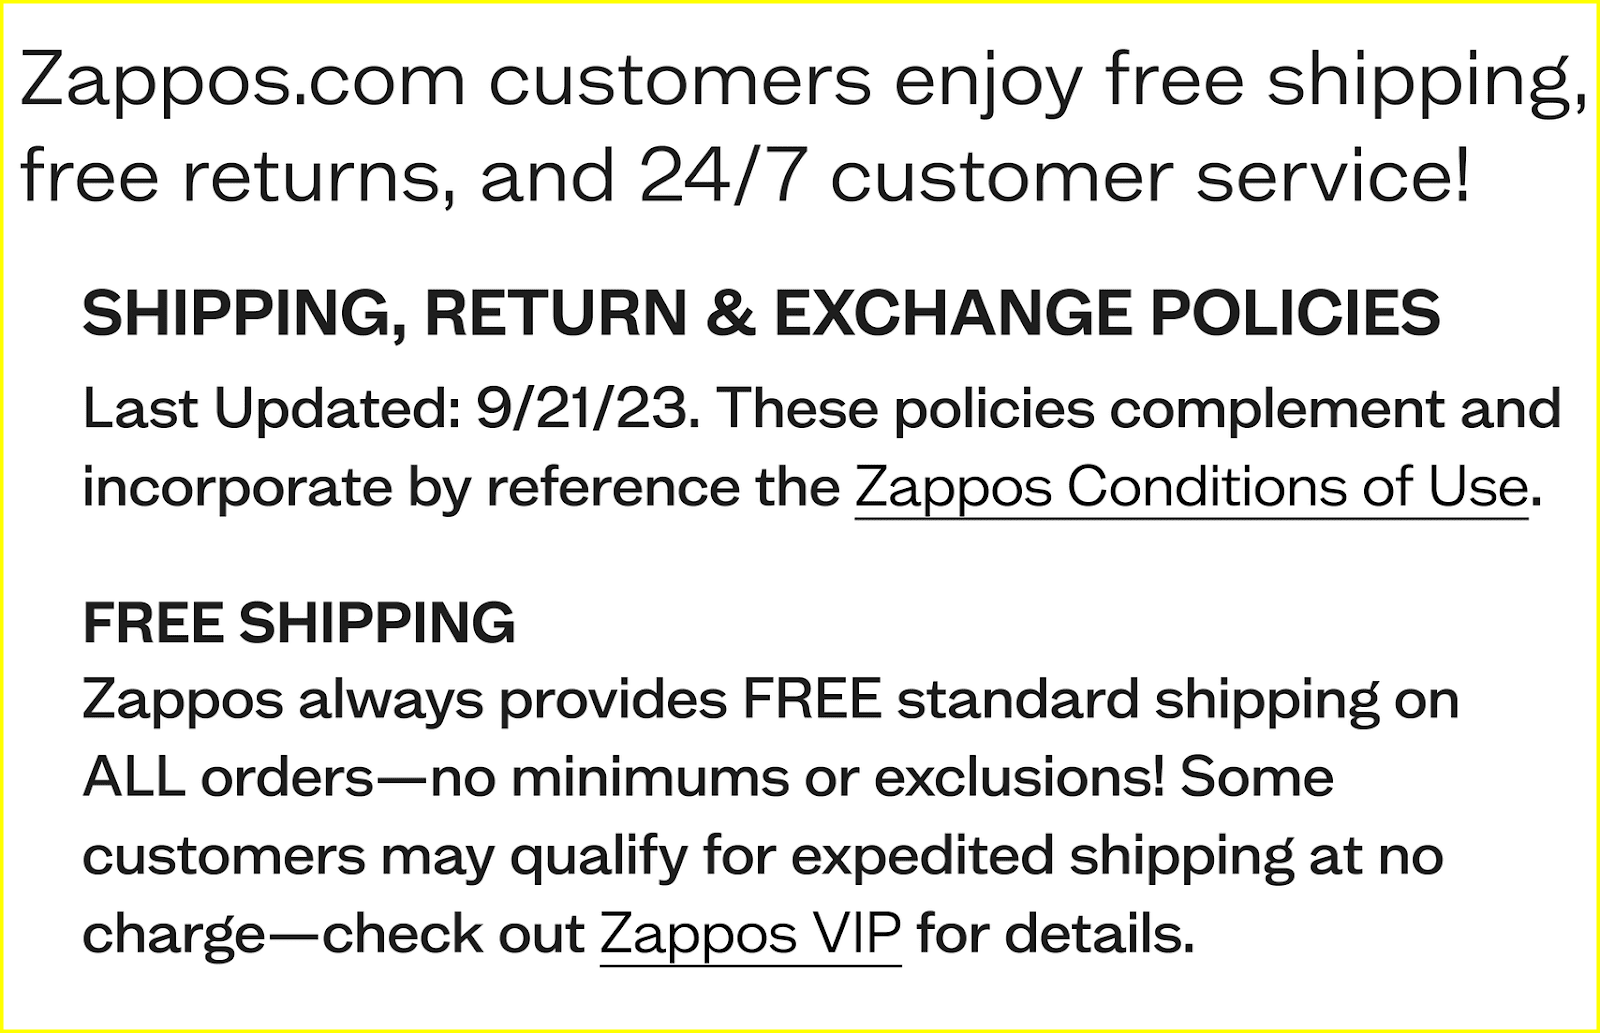 A conception  of Zappos’ shipping and instrumentality    policies